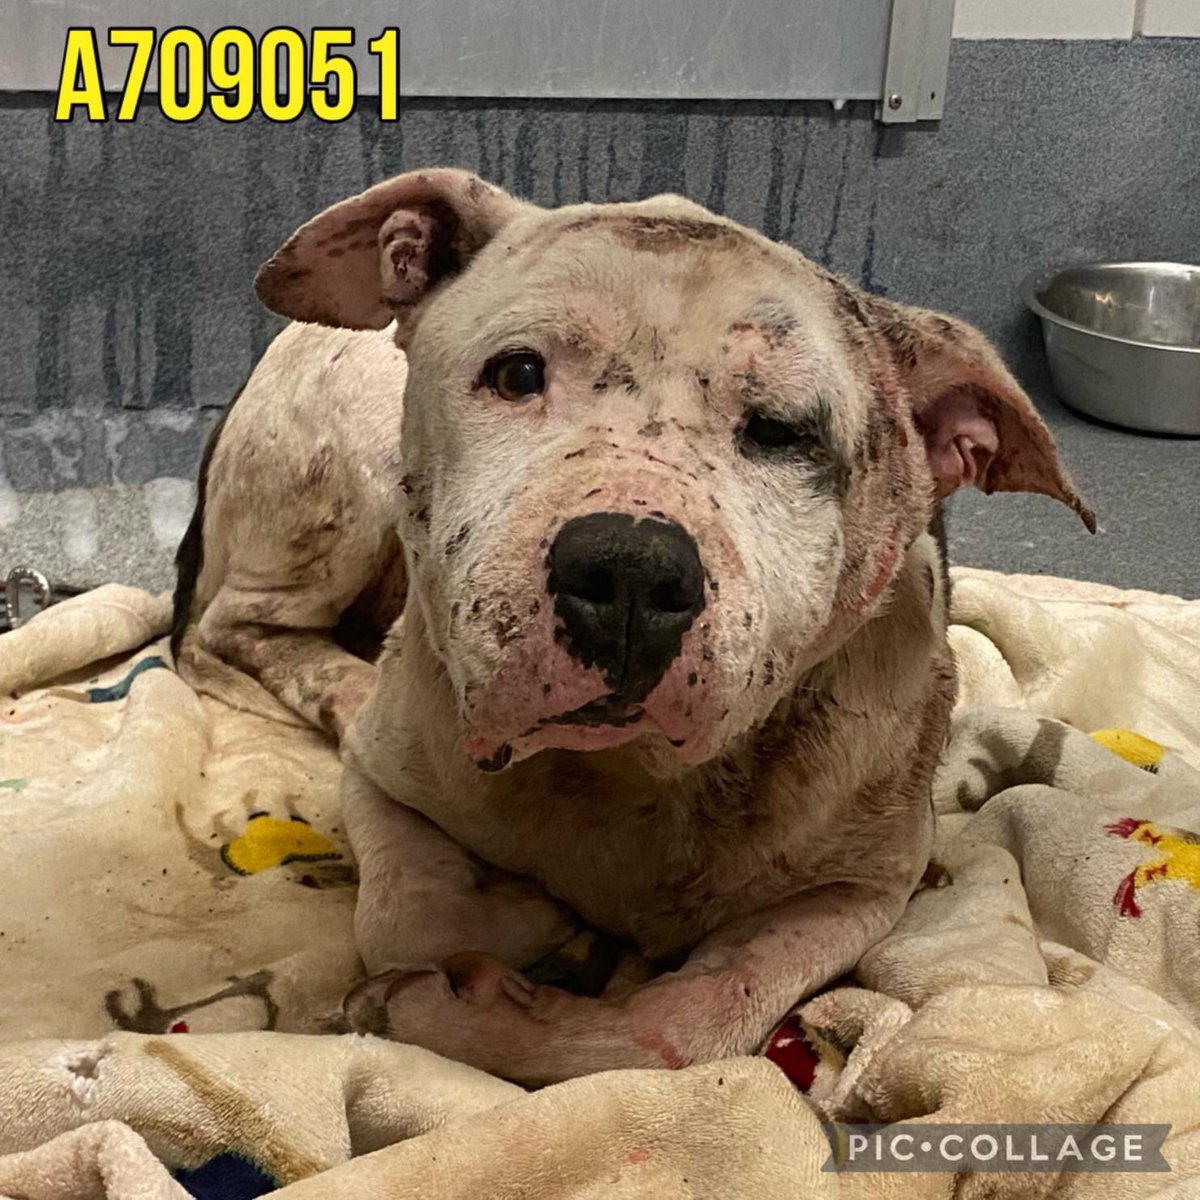 🆘 POOR DOG IN HEARTBREAKING 💔 STATE IS BEING KILLED TMW 4.10 BY SAN ANTONIO ACS (#TEXAS)‼️

TITUS ❤️‍🔥#A709051 4yo M, 58.1lb, HW❤️‍🩹🐛+

🚨📝 lethargic, swelling around L ear, wouds on cranium, scabbed wounds on extr & in L flank

#Foster/#AdoptDontShop ☎️2102074738
#Pledge 🙏🏼